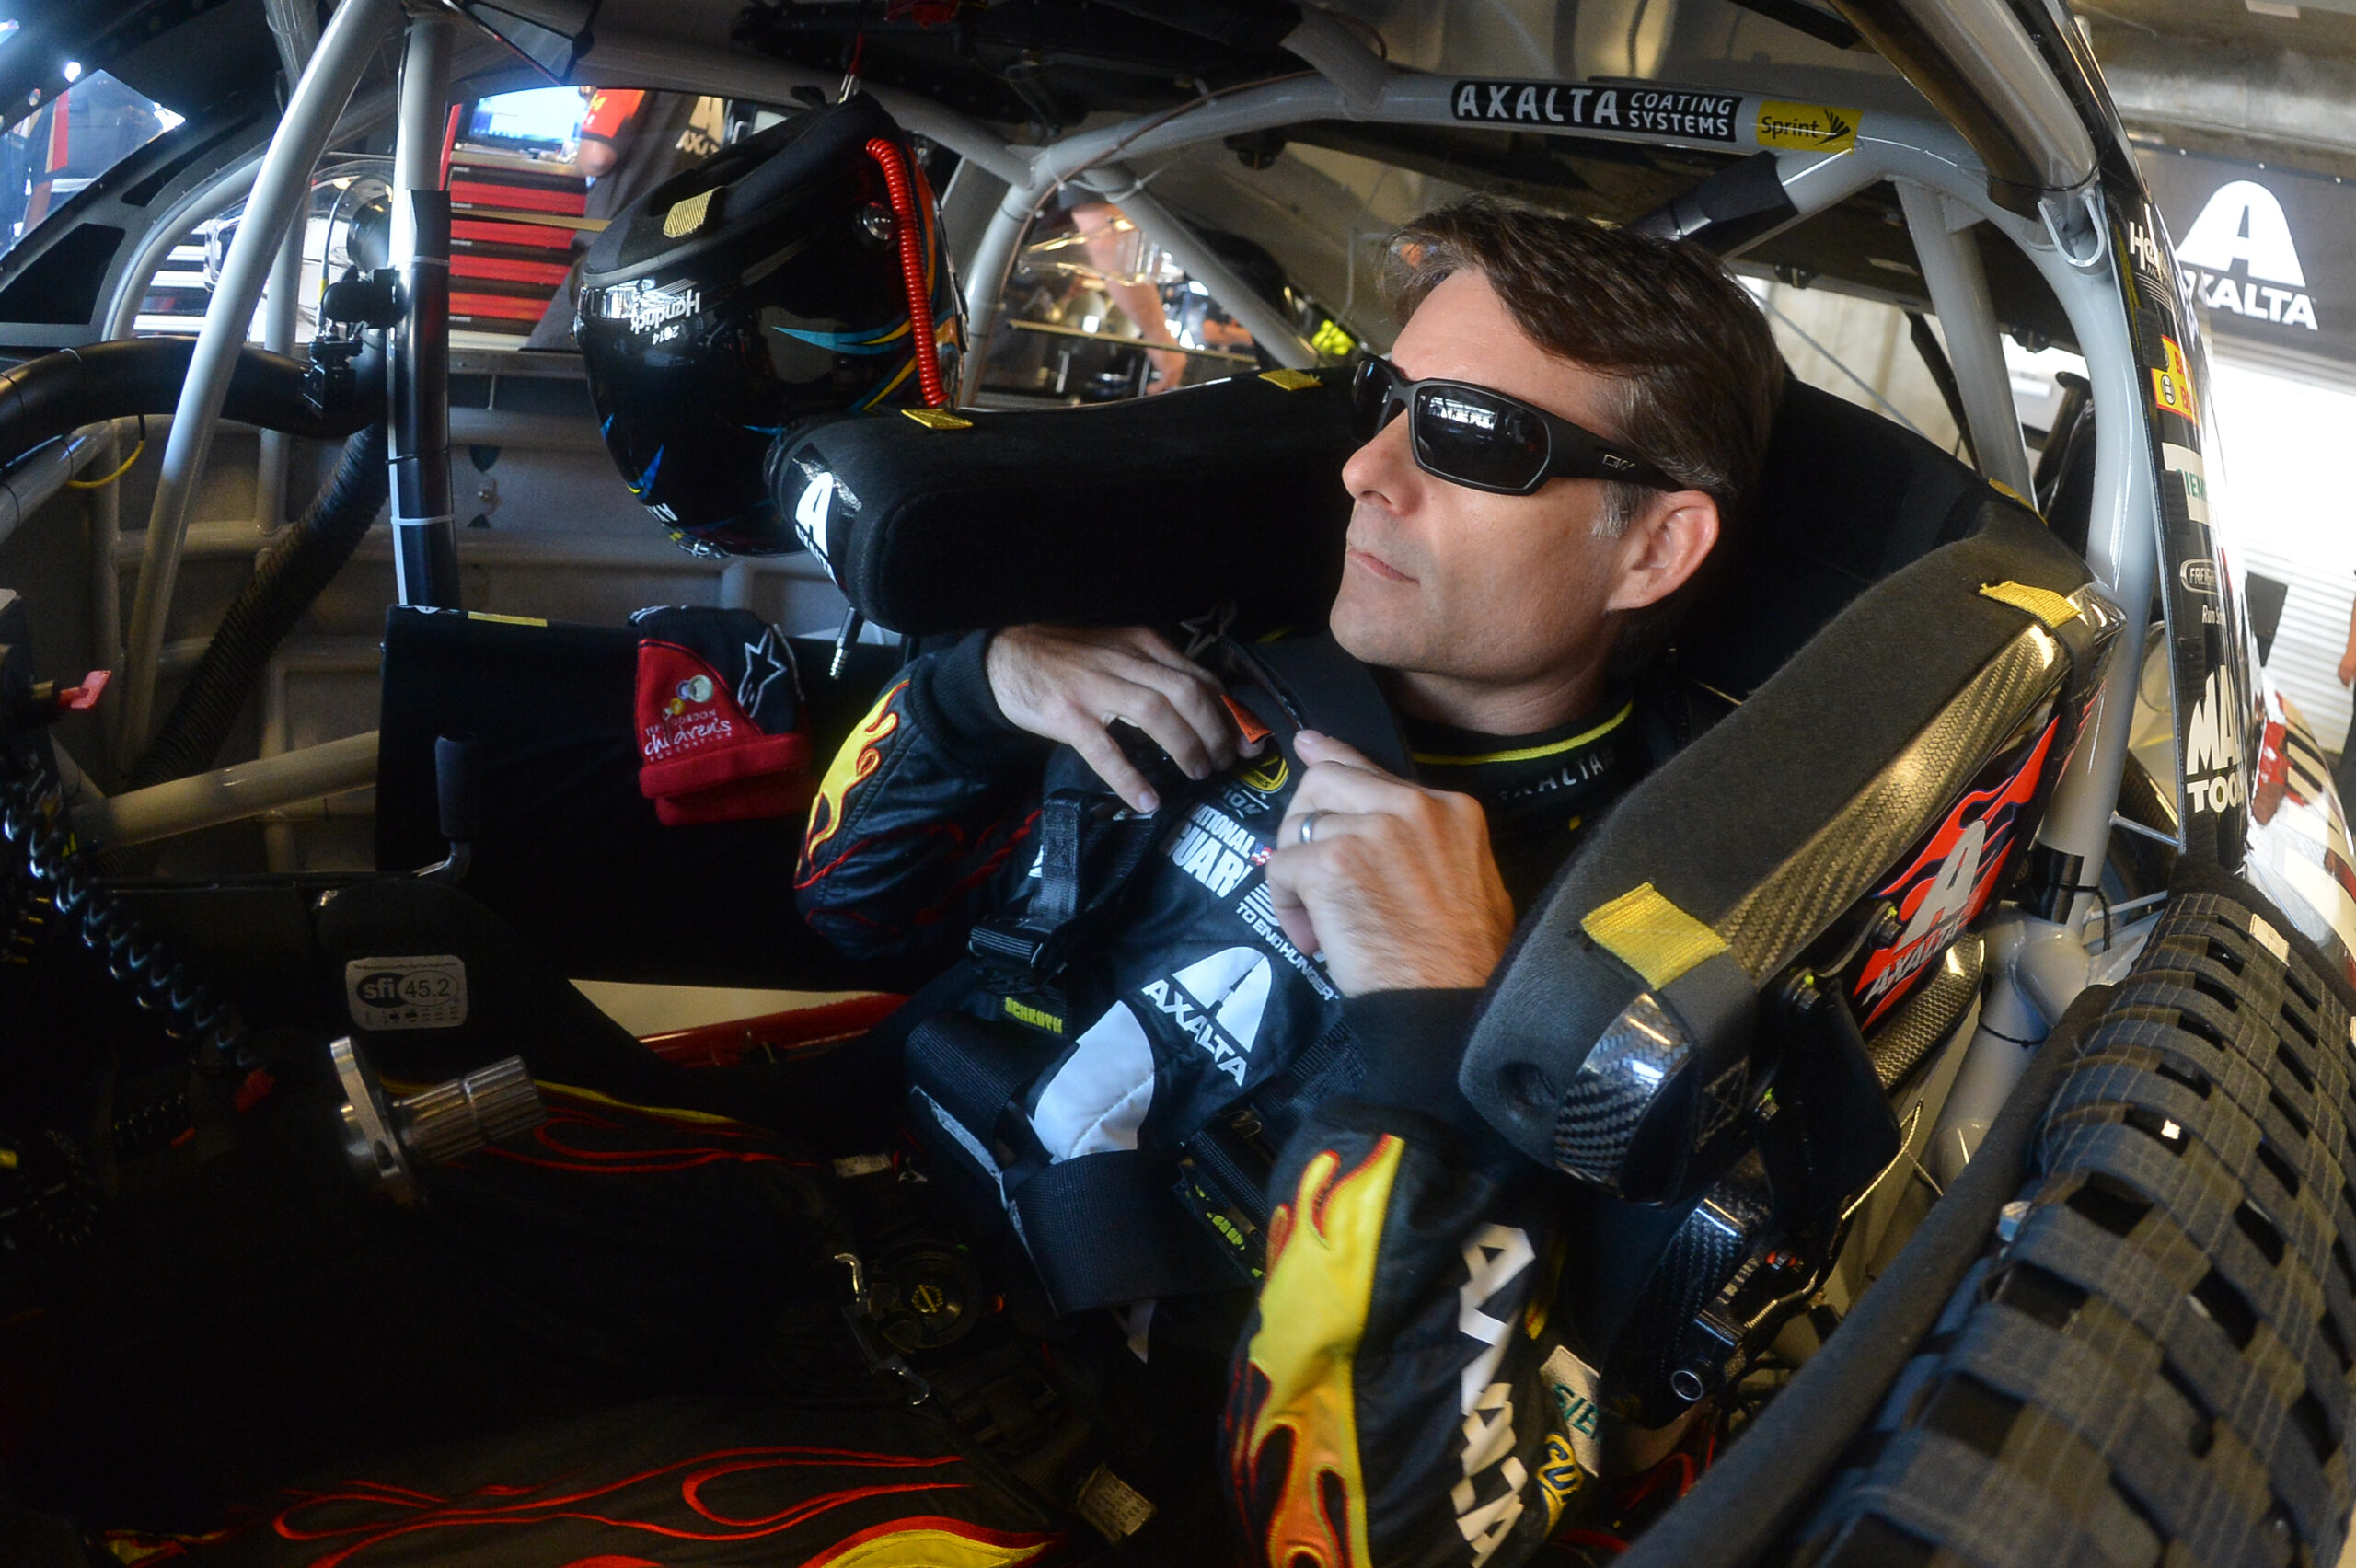 Namely, Jeff Gordon appreciates those who supported him in his early years in NASCAR. (Photo: Chris Owens)